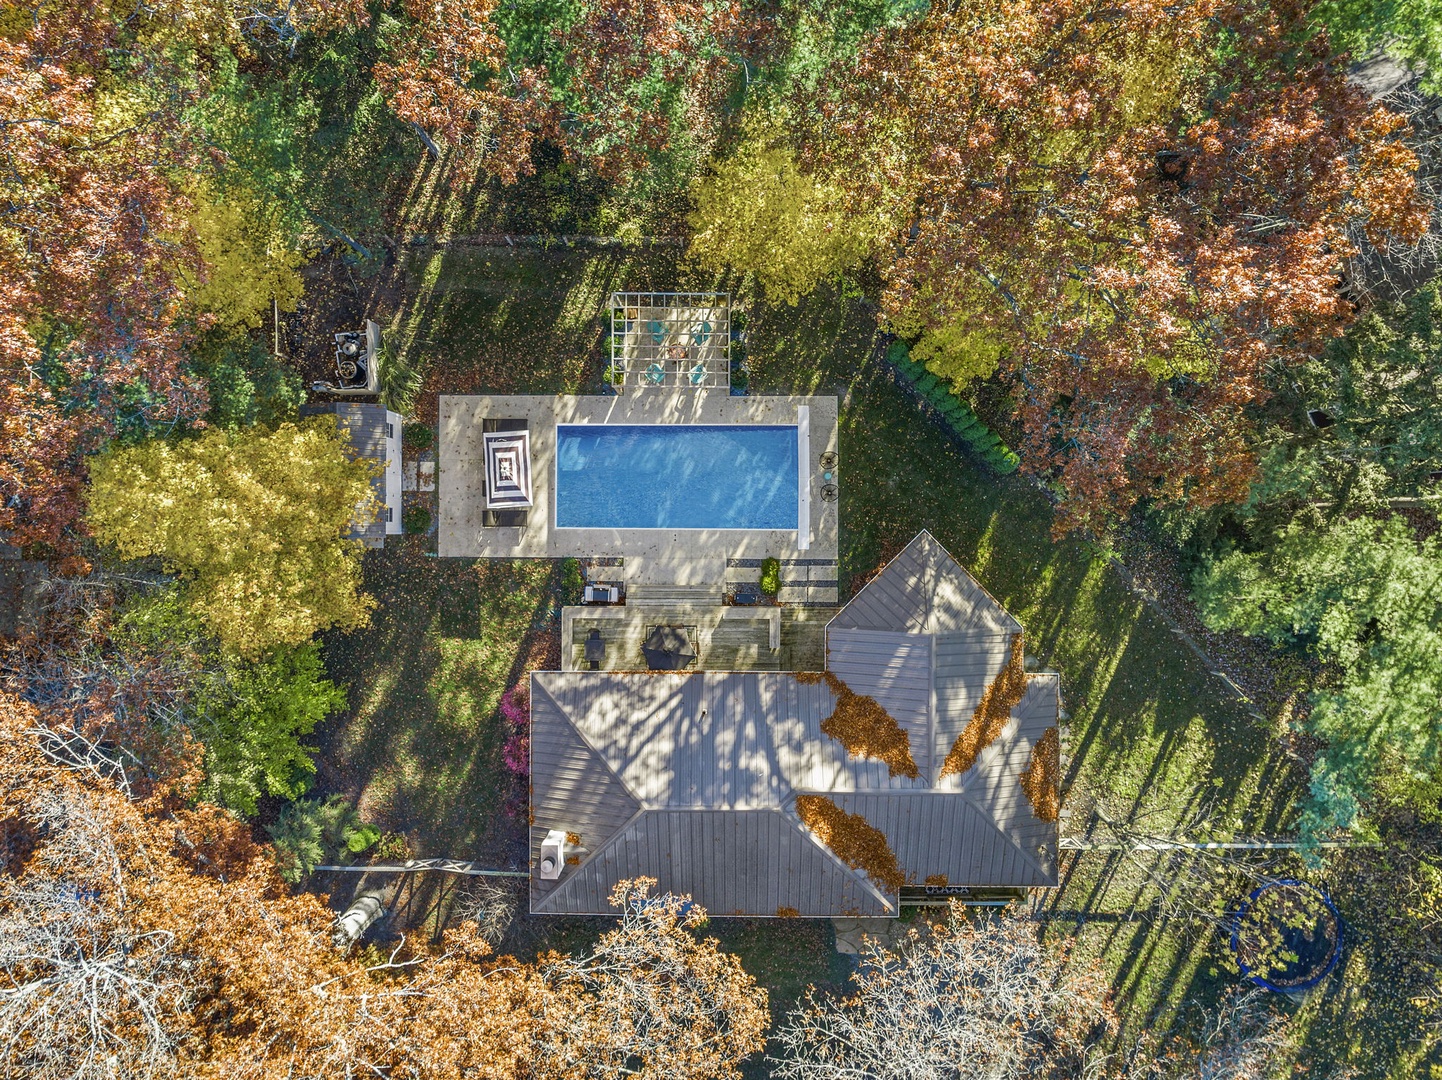 An aerial view of the gorgeous After Dune Delight property.